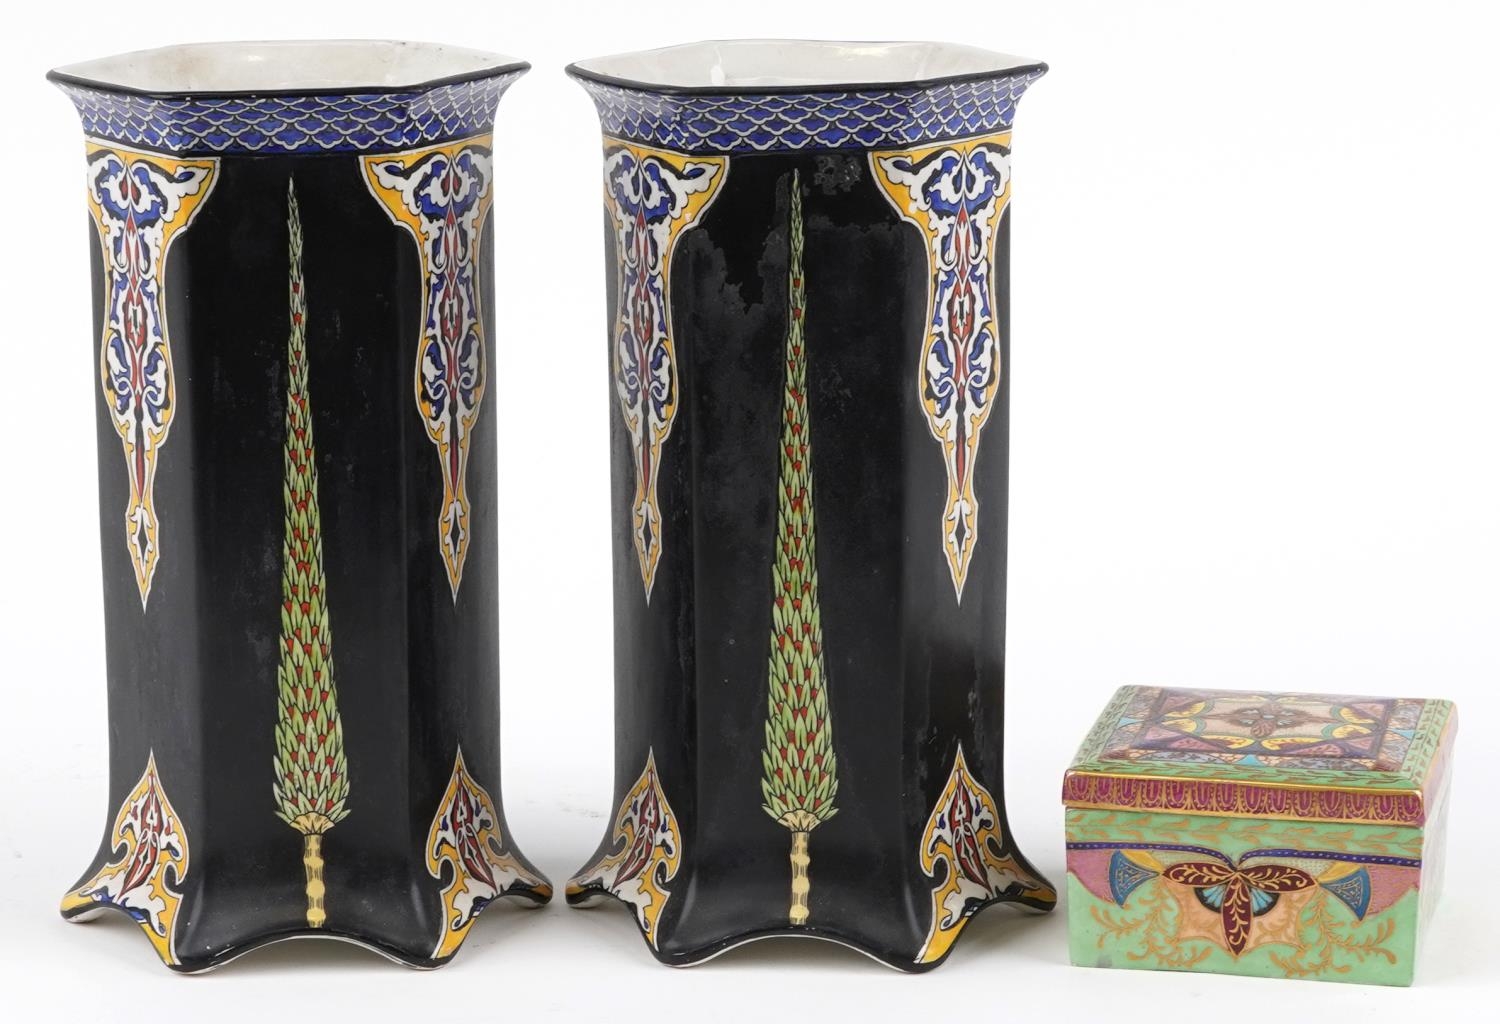 Pair of Art Nouveau hexagonal vases decorated with foliate motifs and a 1930s square box and cover - Image 4 of 5